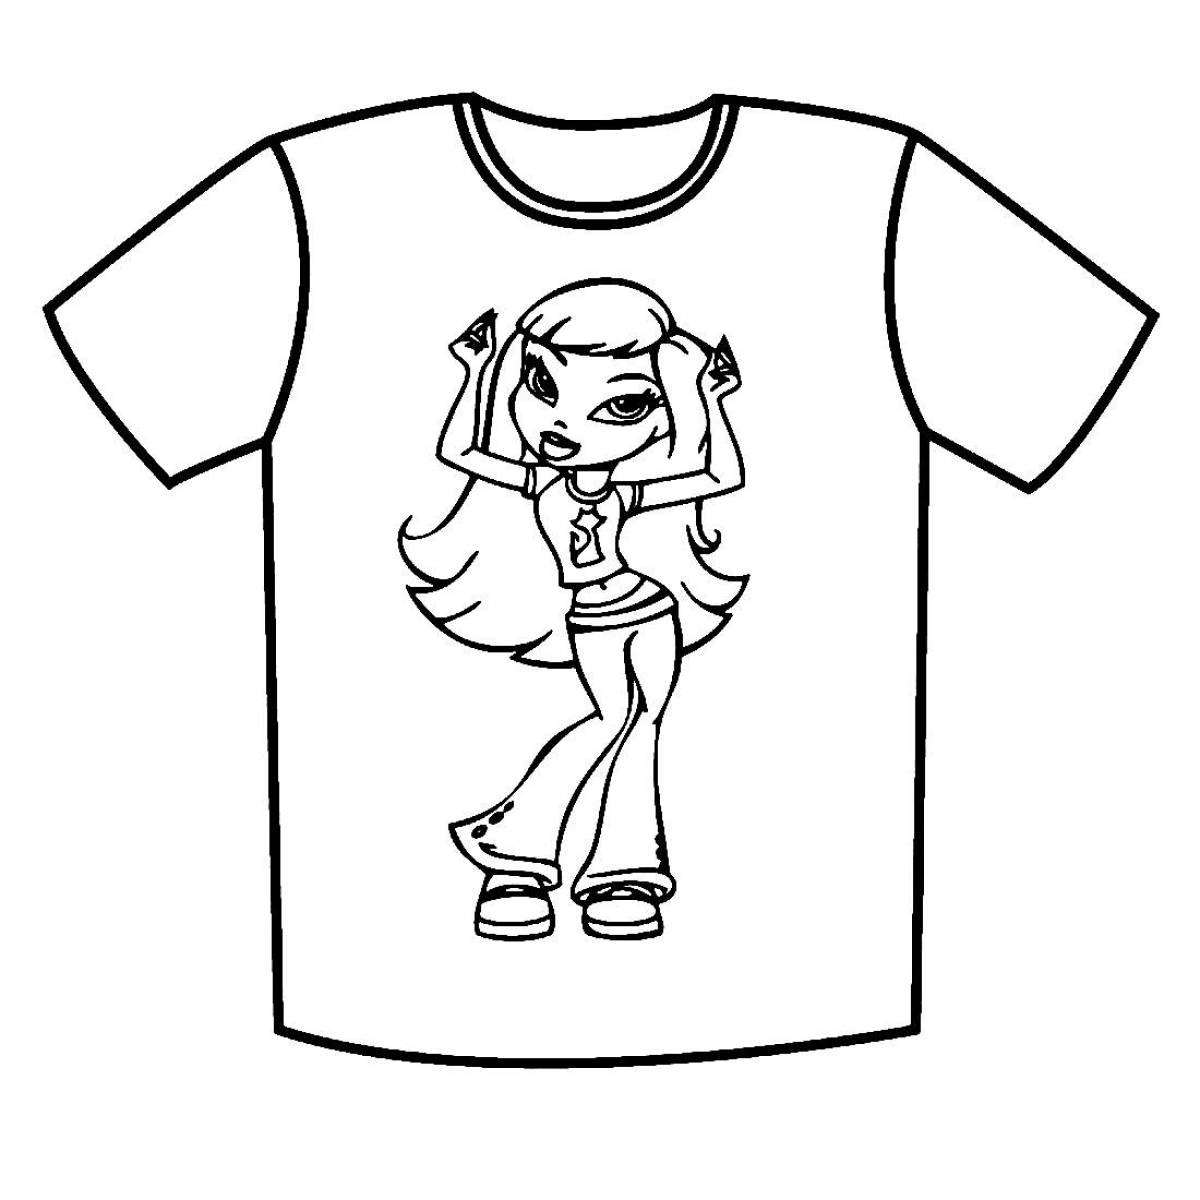 Great t-shirt coloring